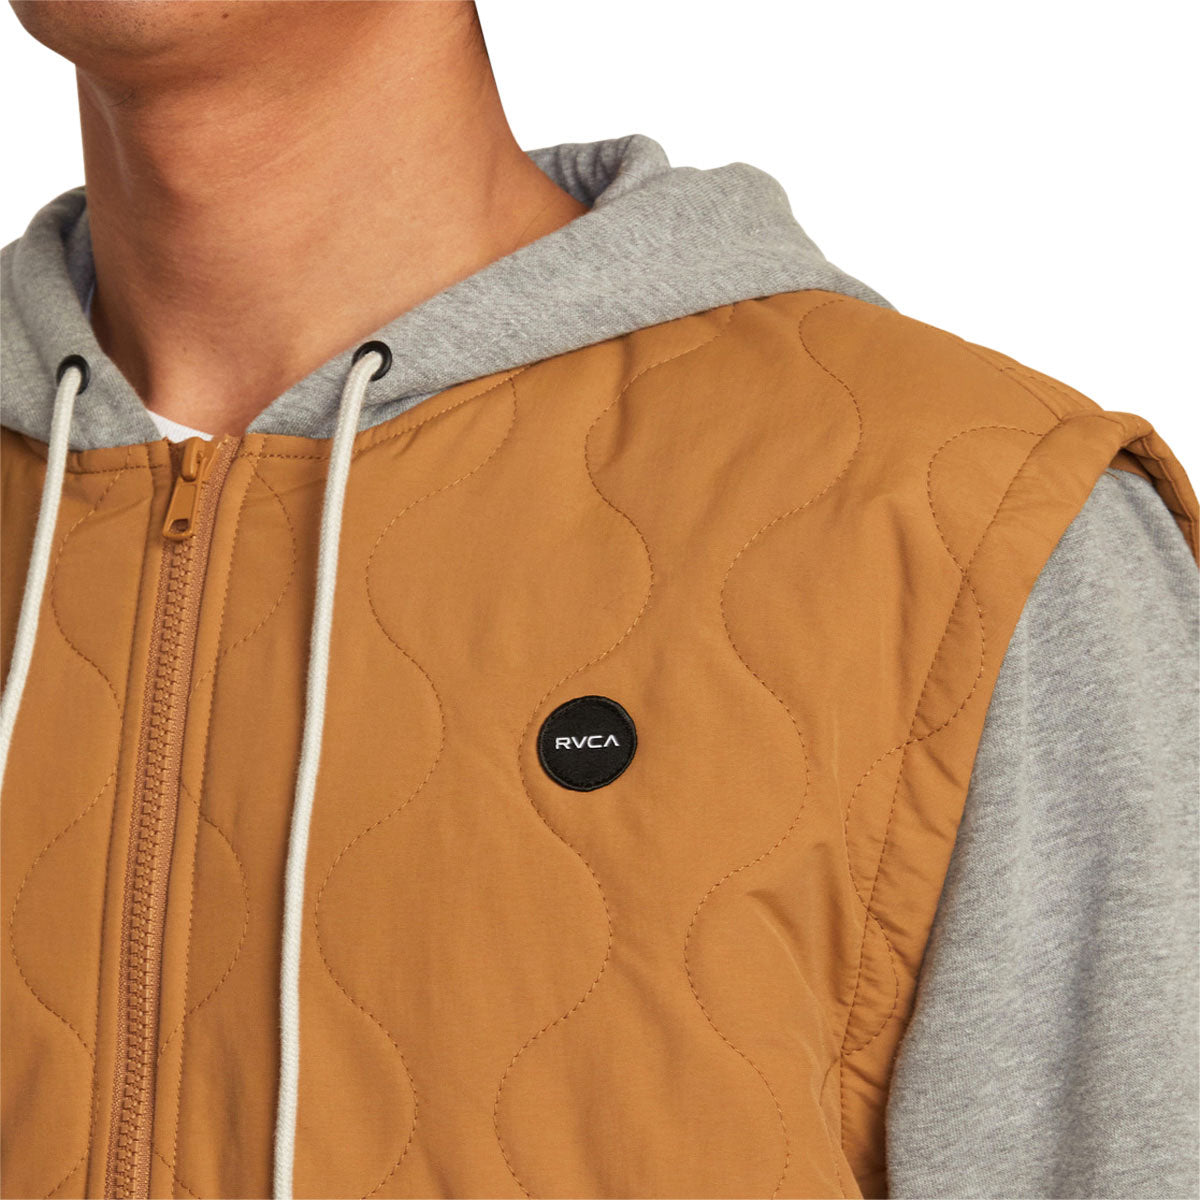 RVCA Grant Puffer Jacket - Camel image 4